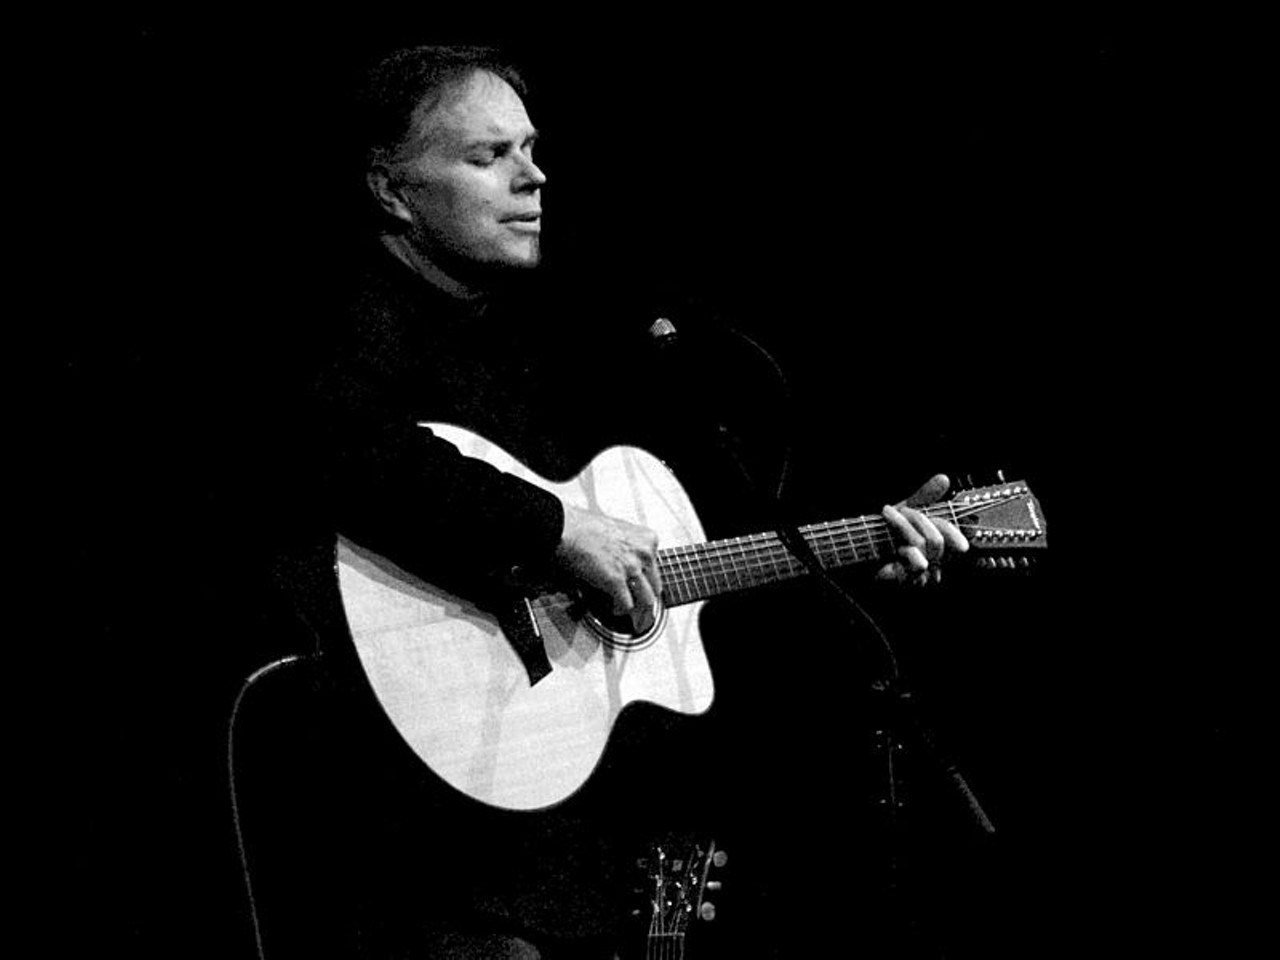 Acoustic guitarist and fingerpicking master Leo Kottke has been around for awhile, advancing his instrument well below the contemporary radar. In the early 2000s, he broadened his recognition in teaming up with Phish bassist Mike Gordon for Clone, a dynamite album that showcased the best of both musicians. Cuts like “Collins Missile” and the title track brought Kottke’s interesting style to the hordes of fans willing to pick up anything even tangentially related to Phish. But Kottke’s history traces a 40-year arc across syncopated acoustic odyssey (a sonic predecessor to the likes of Keller Williams, let’s say). When he’s in his element and soaring across the melodies of “Airproofing II” or “Peckerwood,” for instance, he’s mesmerizing. Tonight's show takes place at 7:30 p.m. at the Music Box Supper Club. (Sandy) $35 ADV, $40 DOS